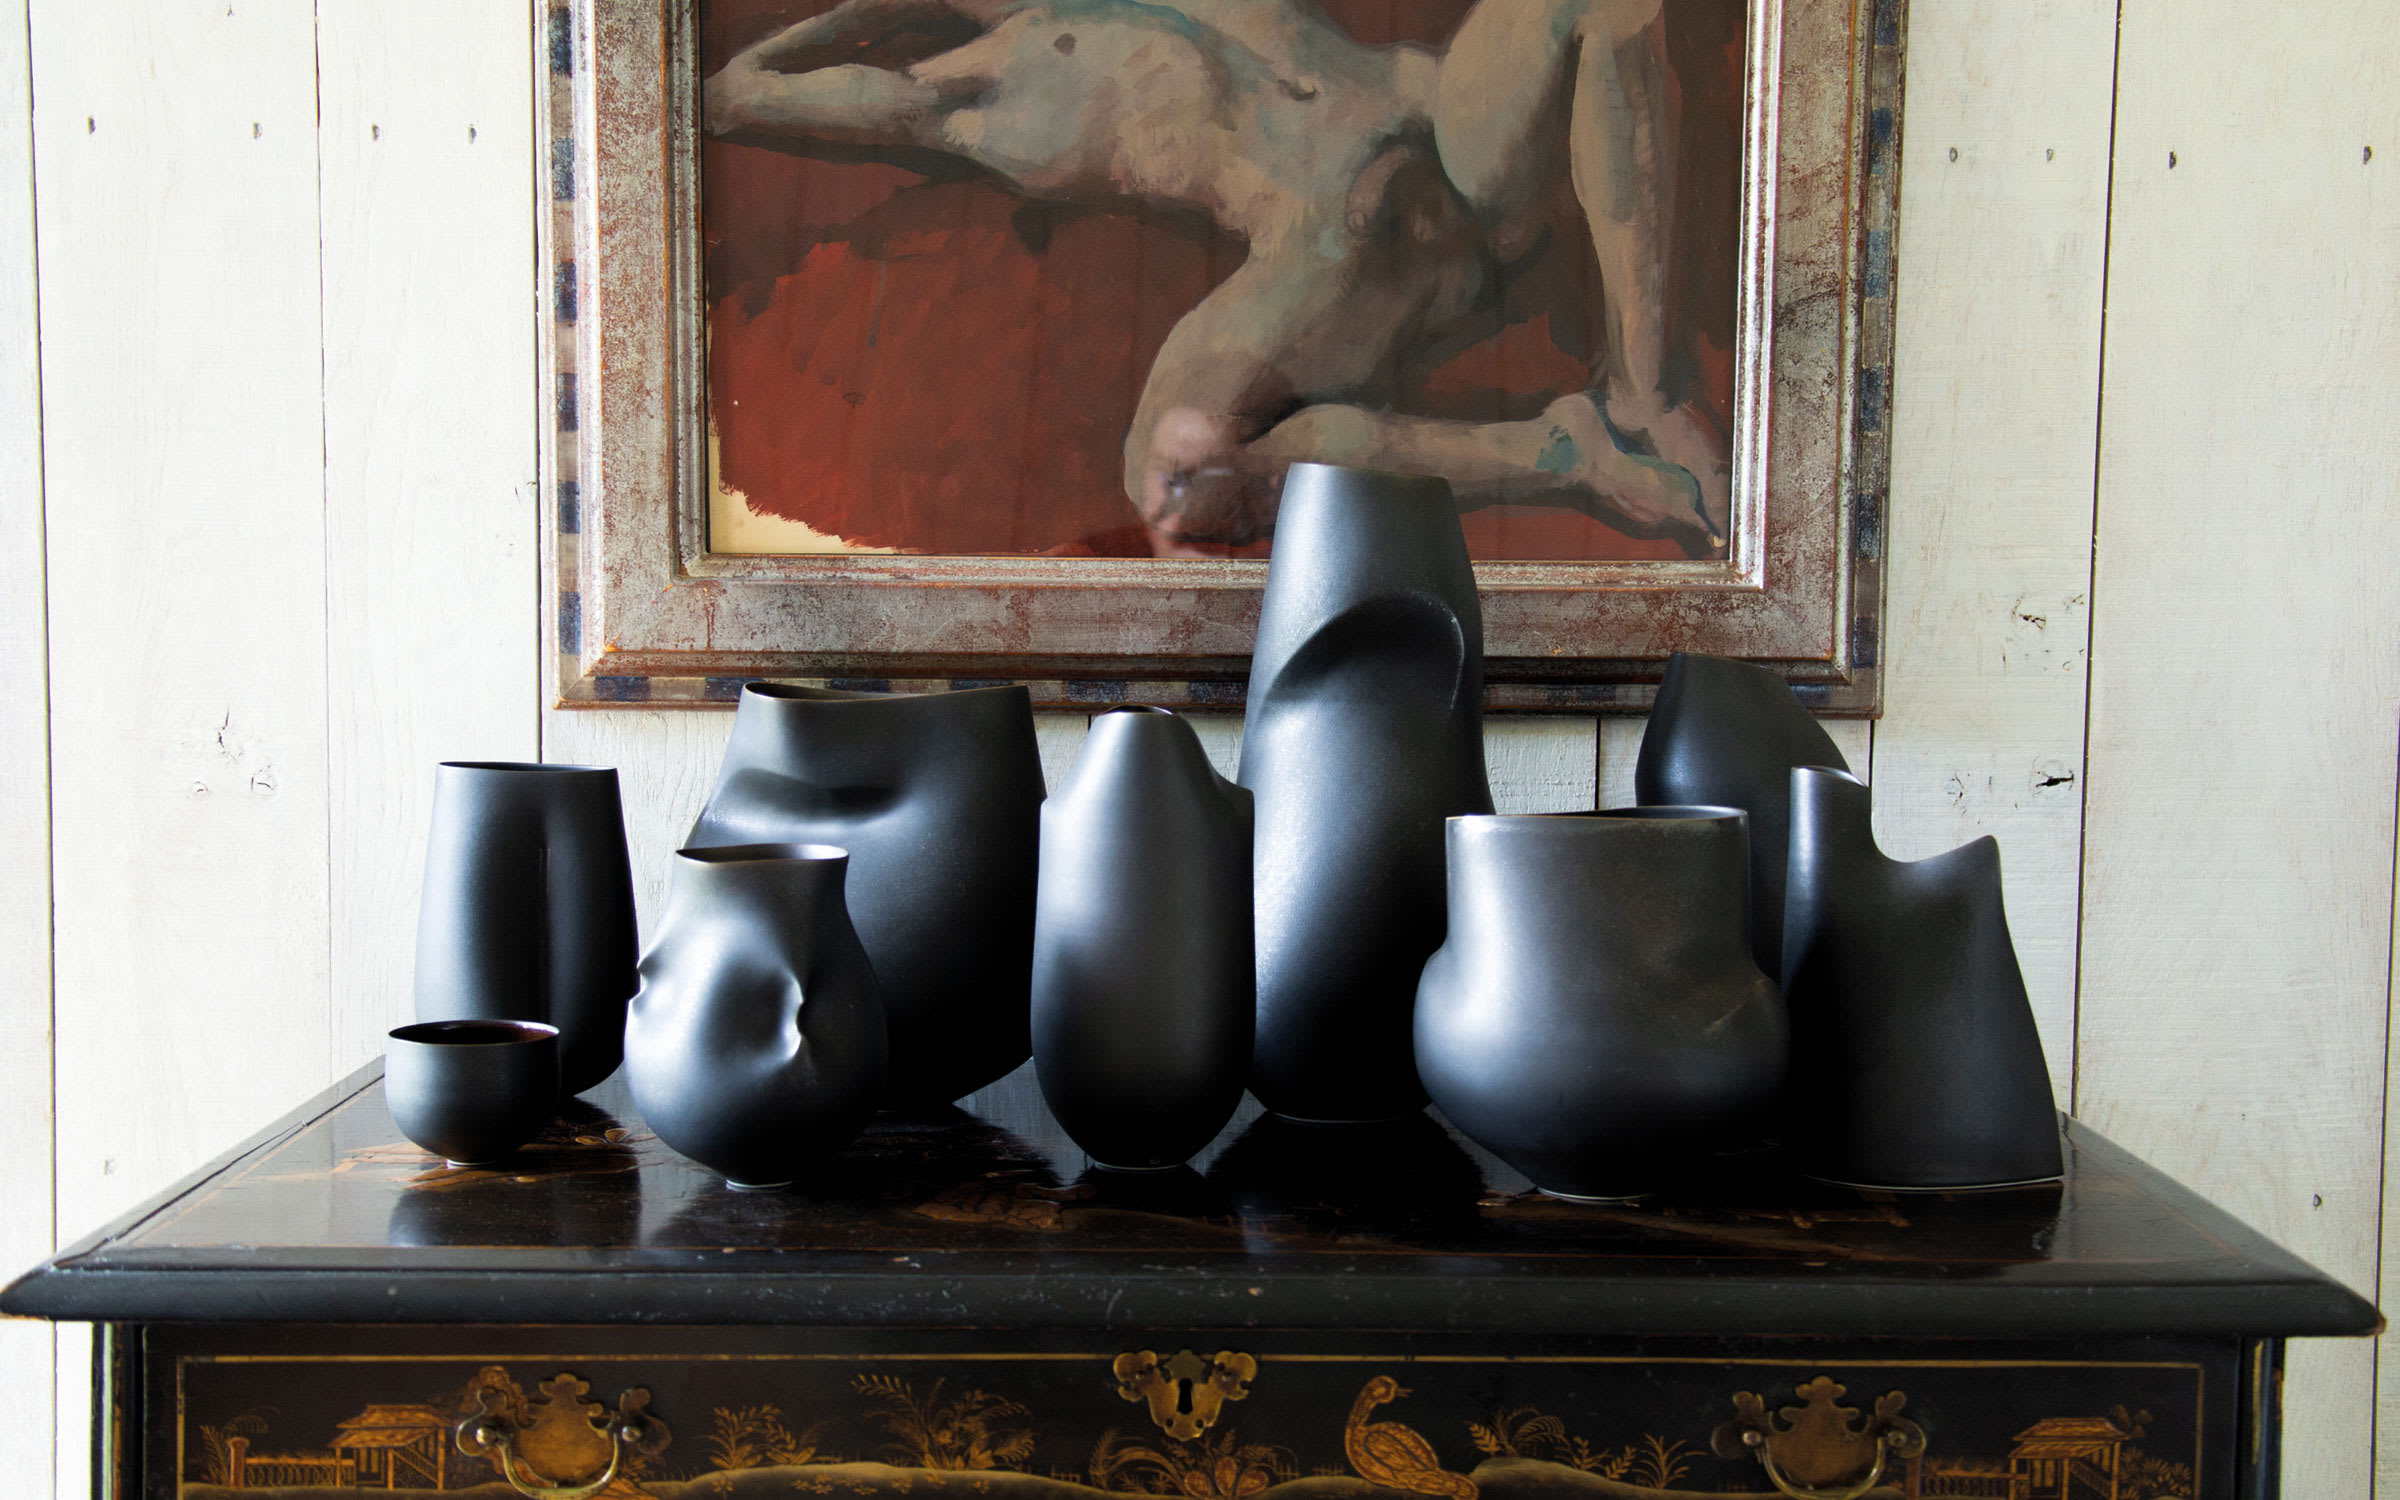 In the foreground, a series of ceramics by Sarah Flynn; in the background, a detail of Robert Petit reclining with red background, by Pavel Tchelitchew.